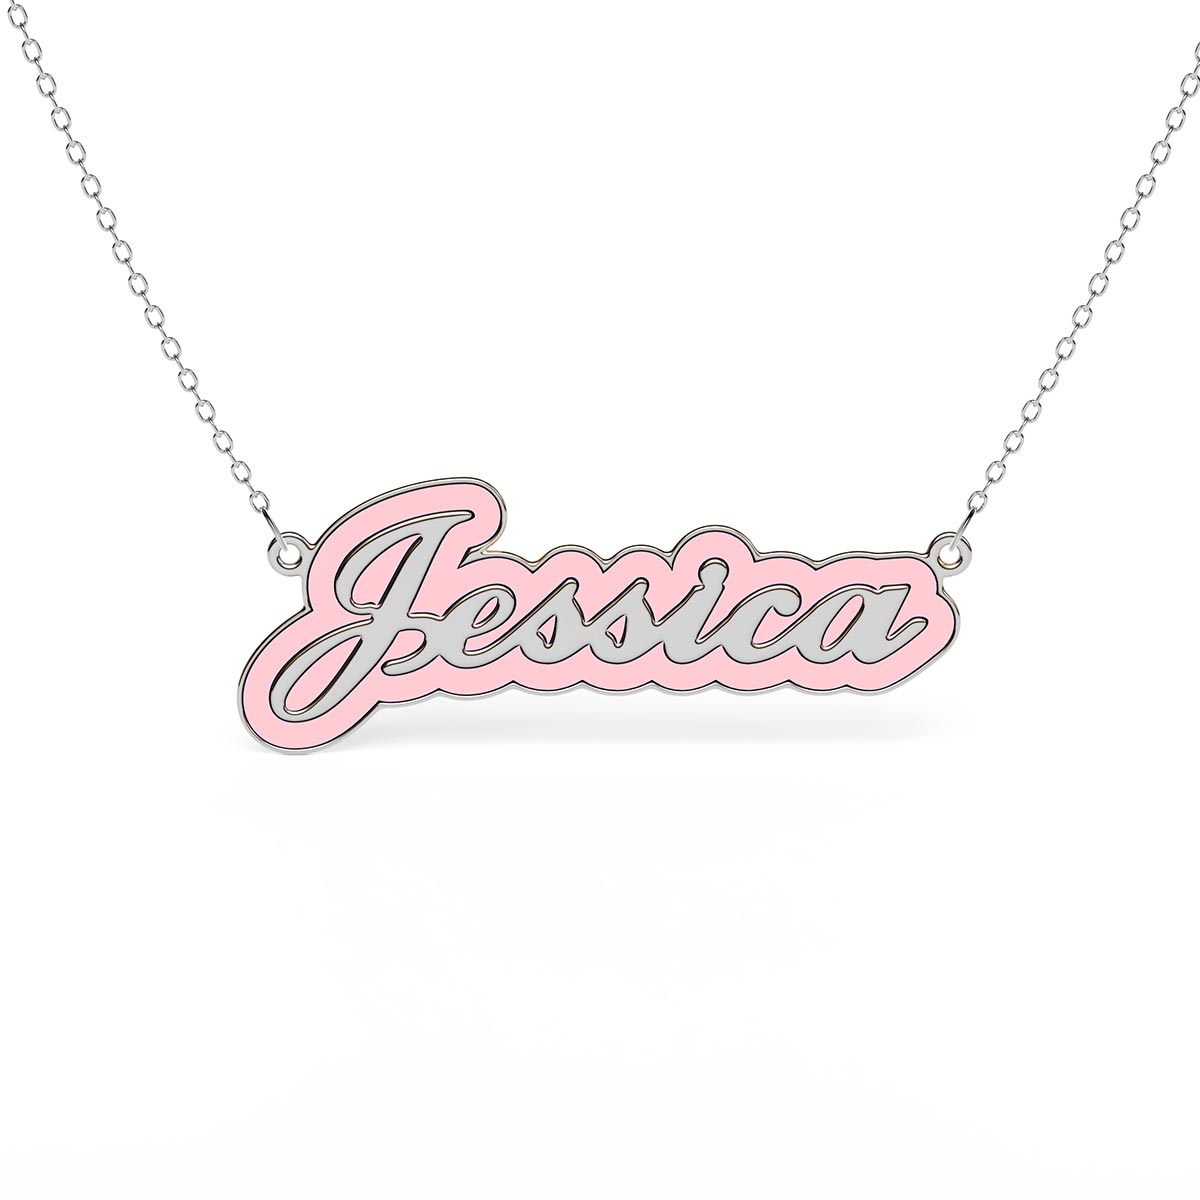 Personalized Name Necklace with Pink Enamel Outline